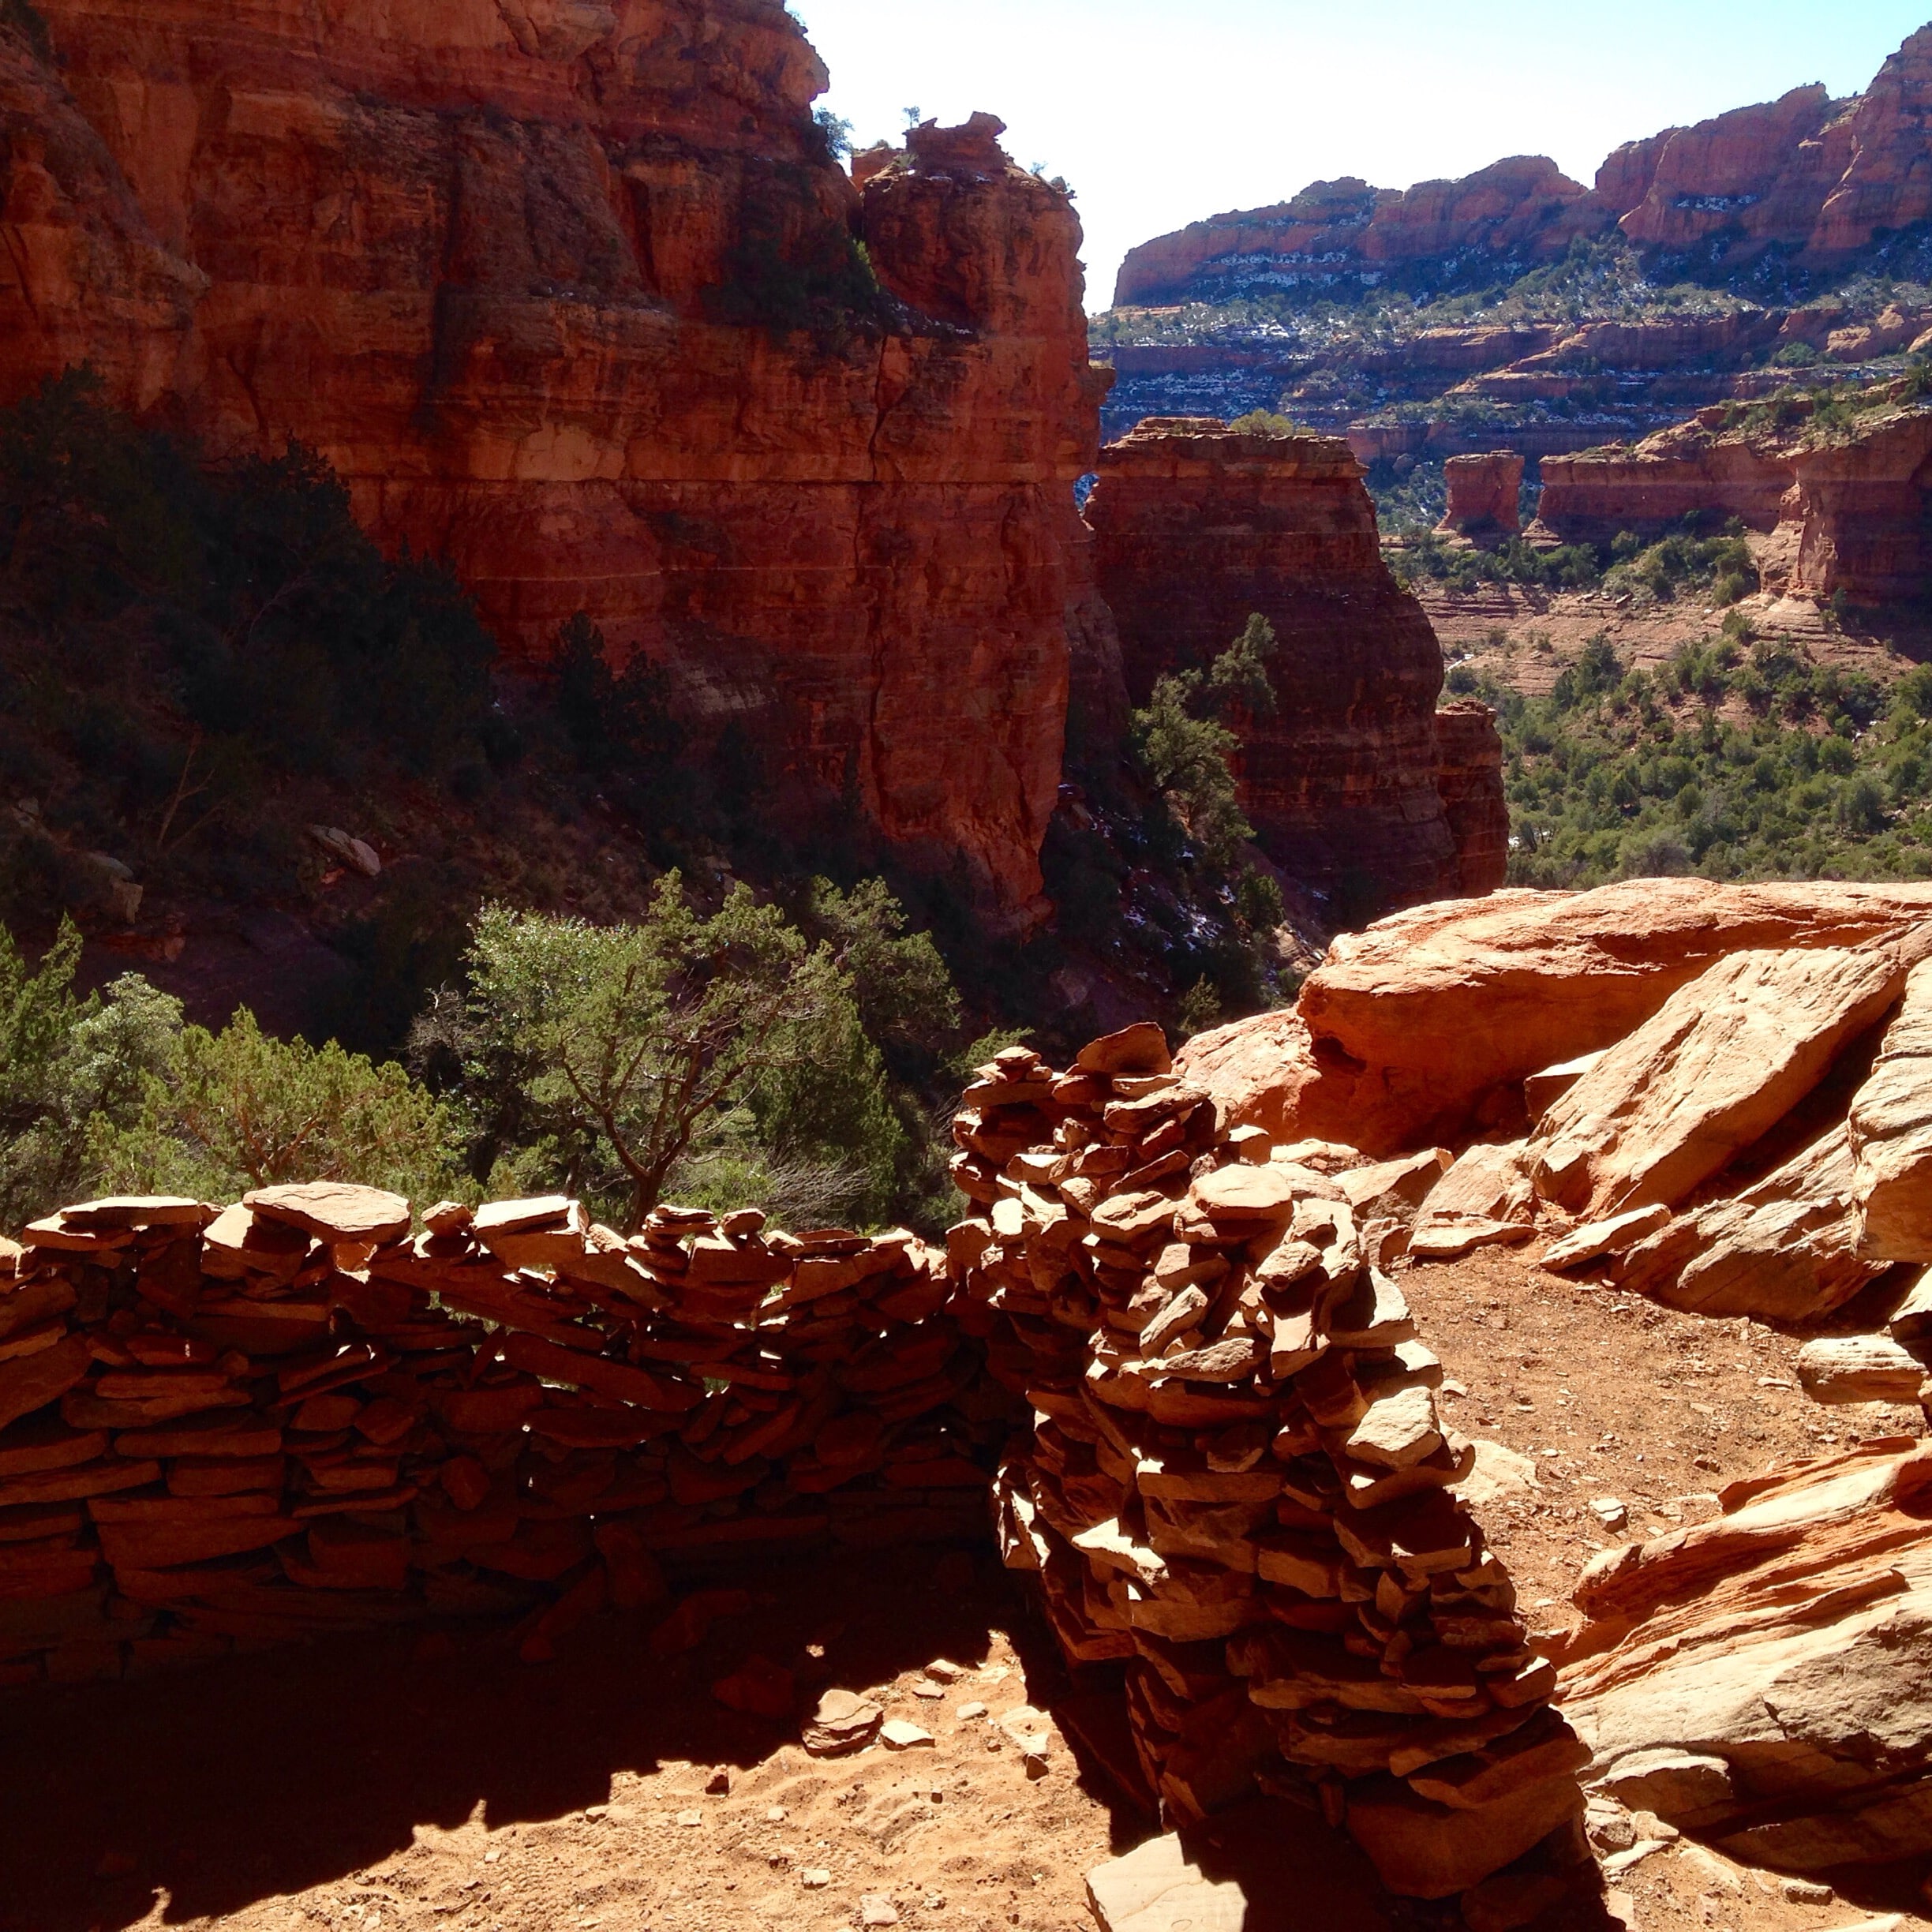 Hiking in Sedona Arizona, there are endless trails to try.